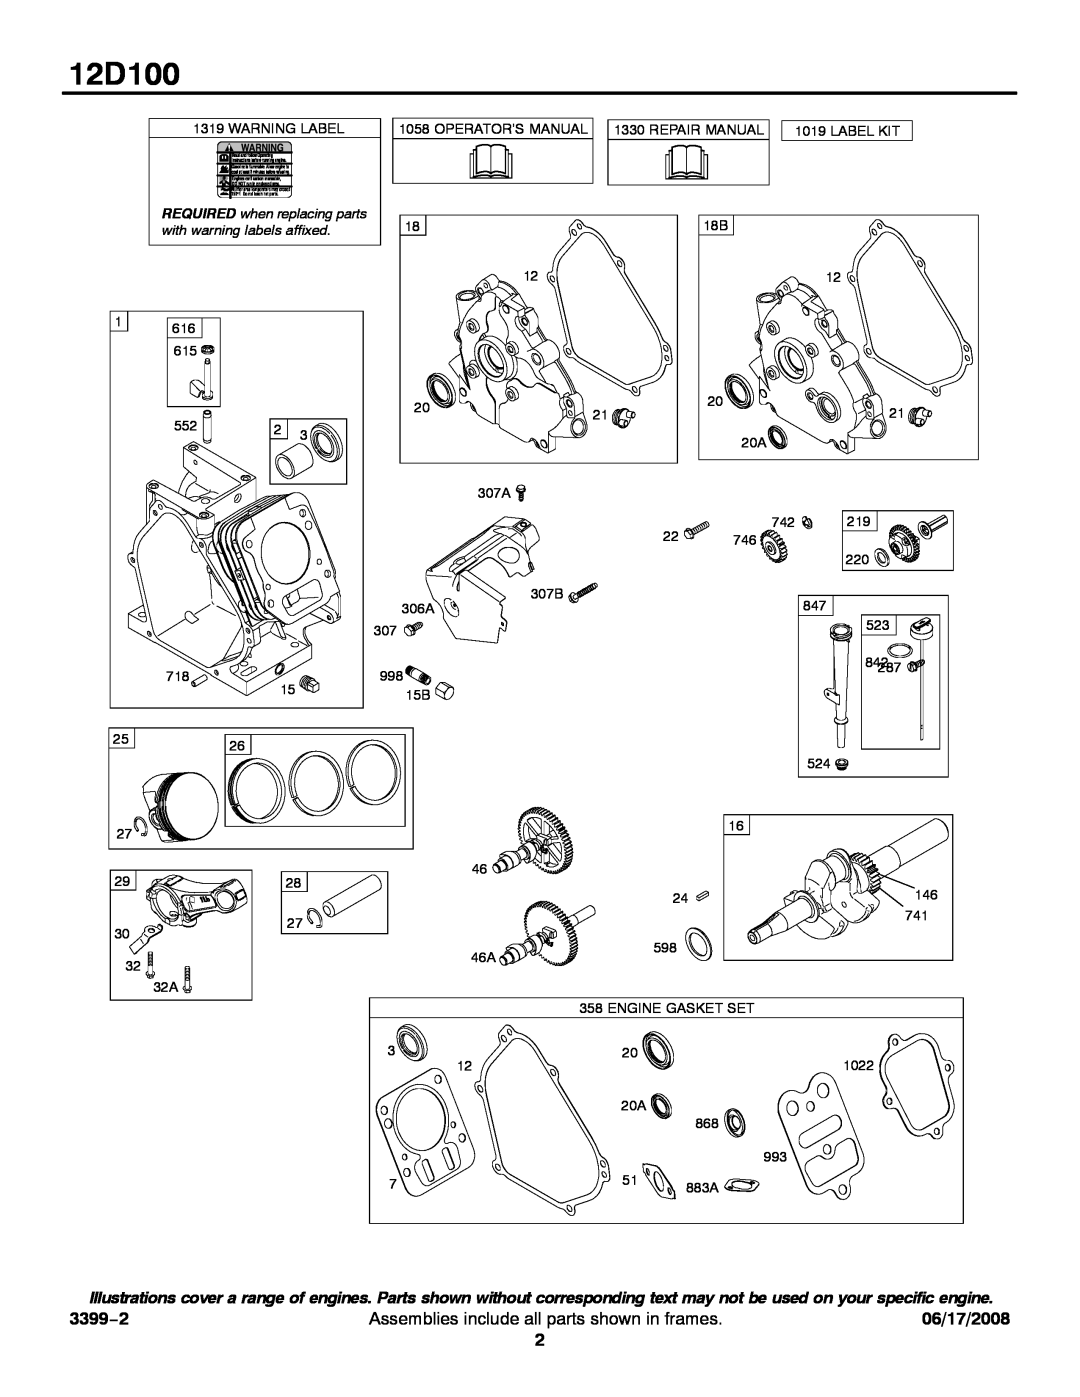 Snapper 12D100 3399−2, Assemblies include all parts shown in frames, 06/17/2008, REQUIRED when replacing parts 